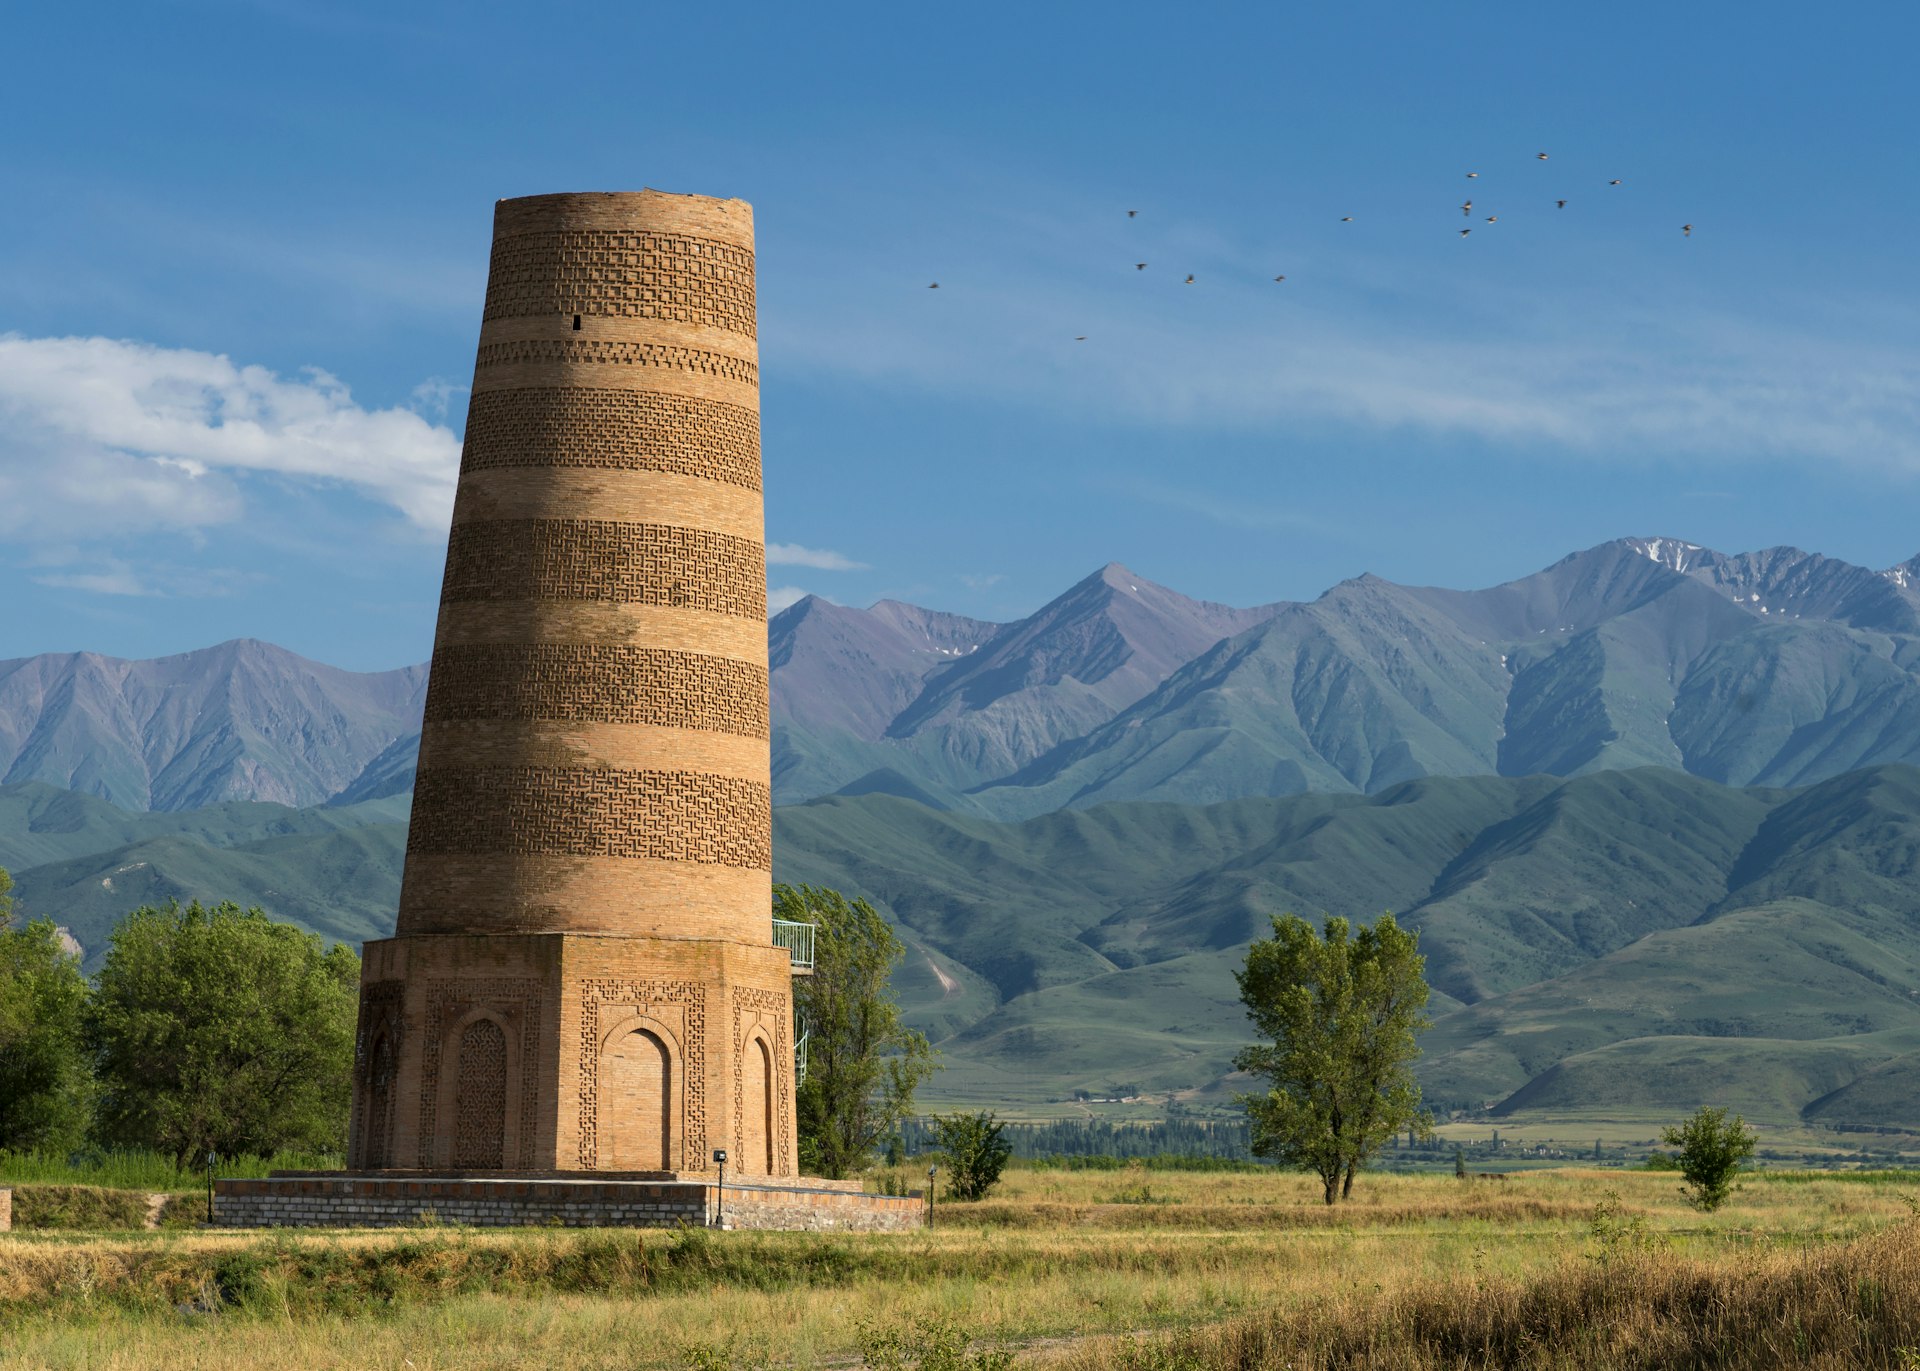 A stone tower backed by mountains